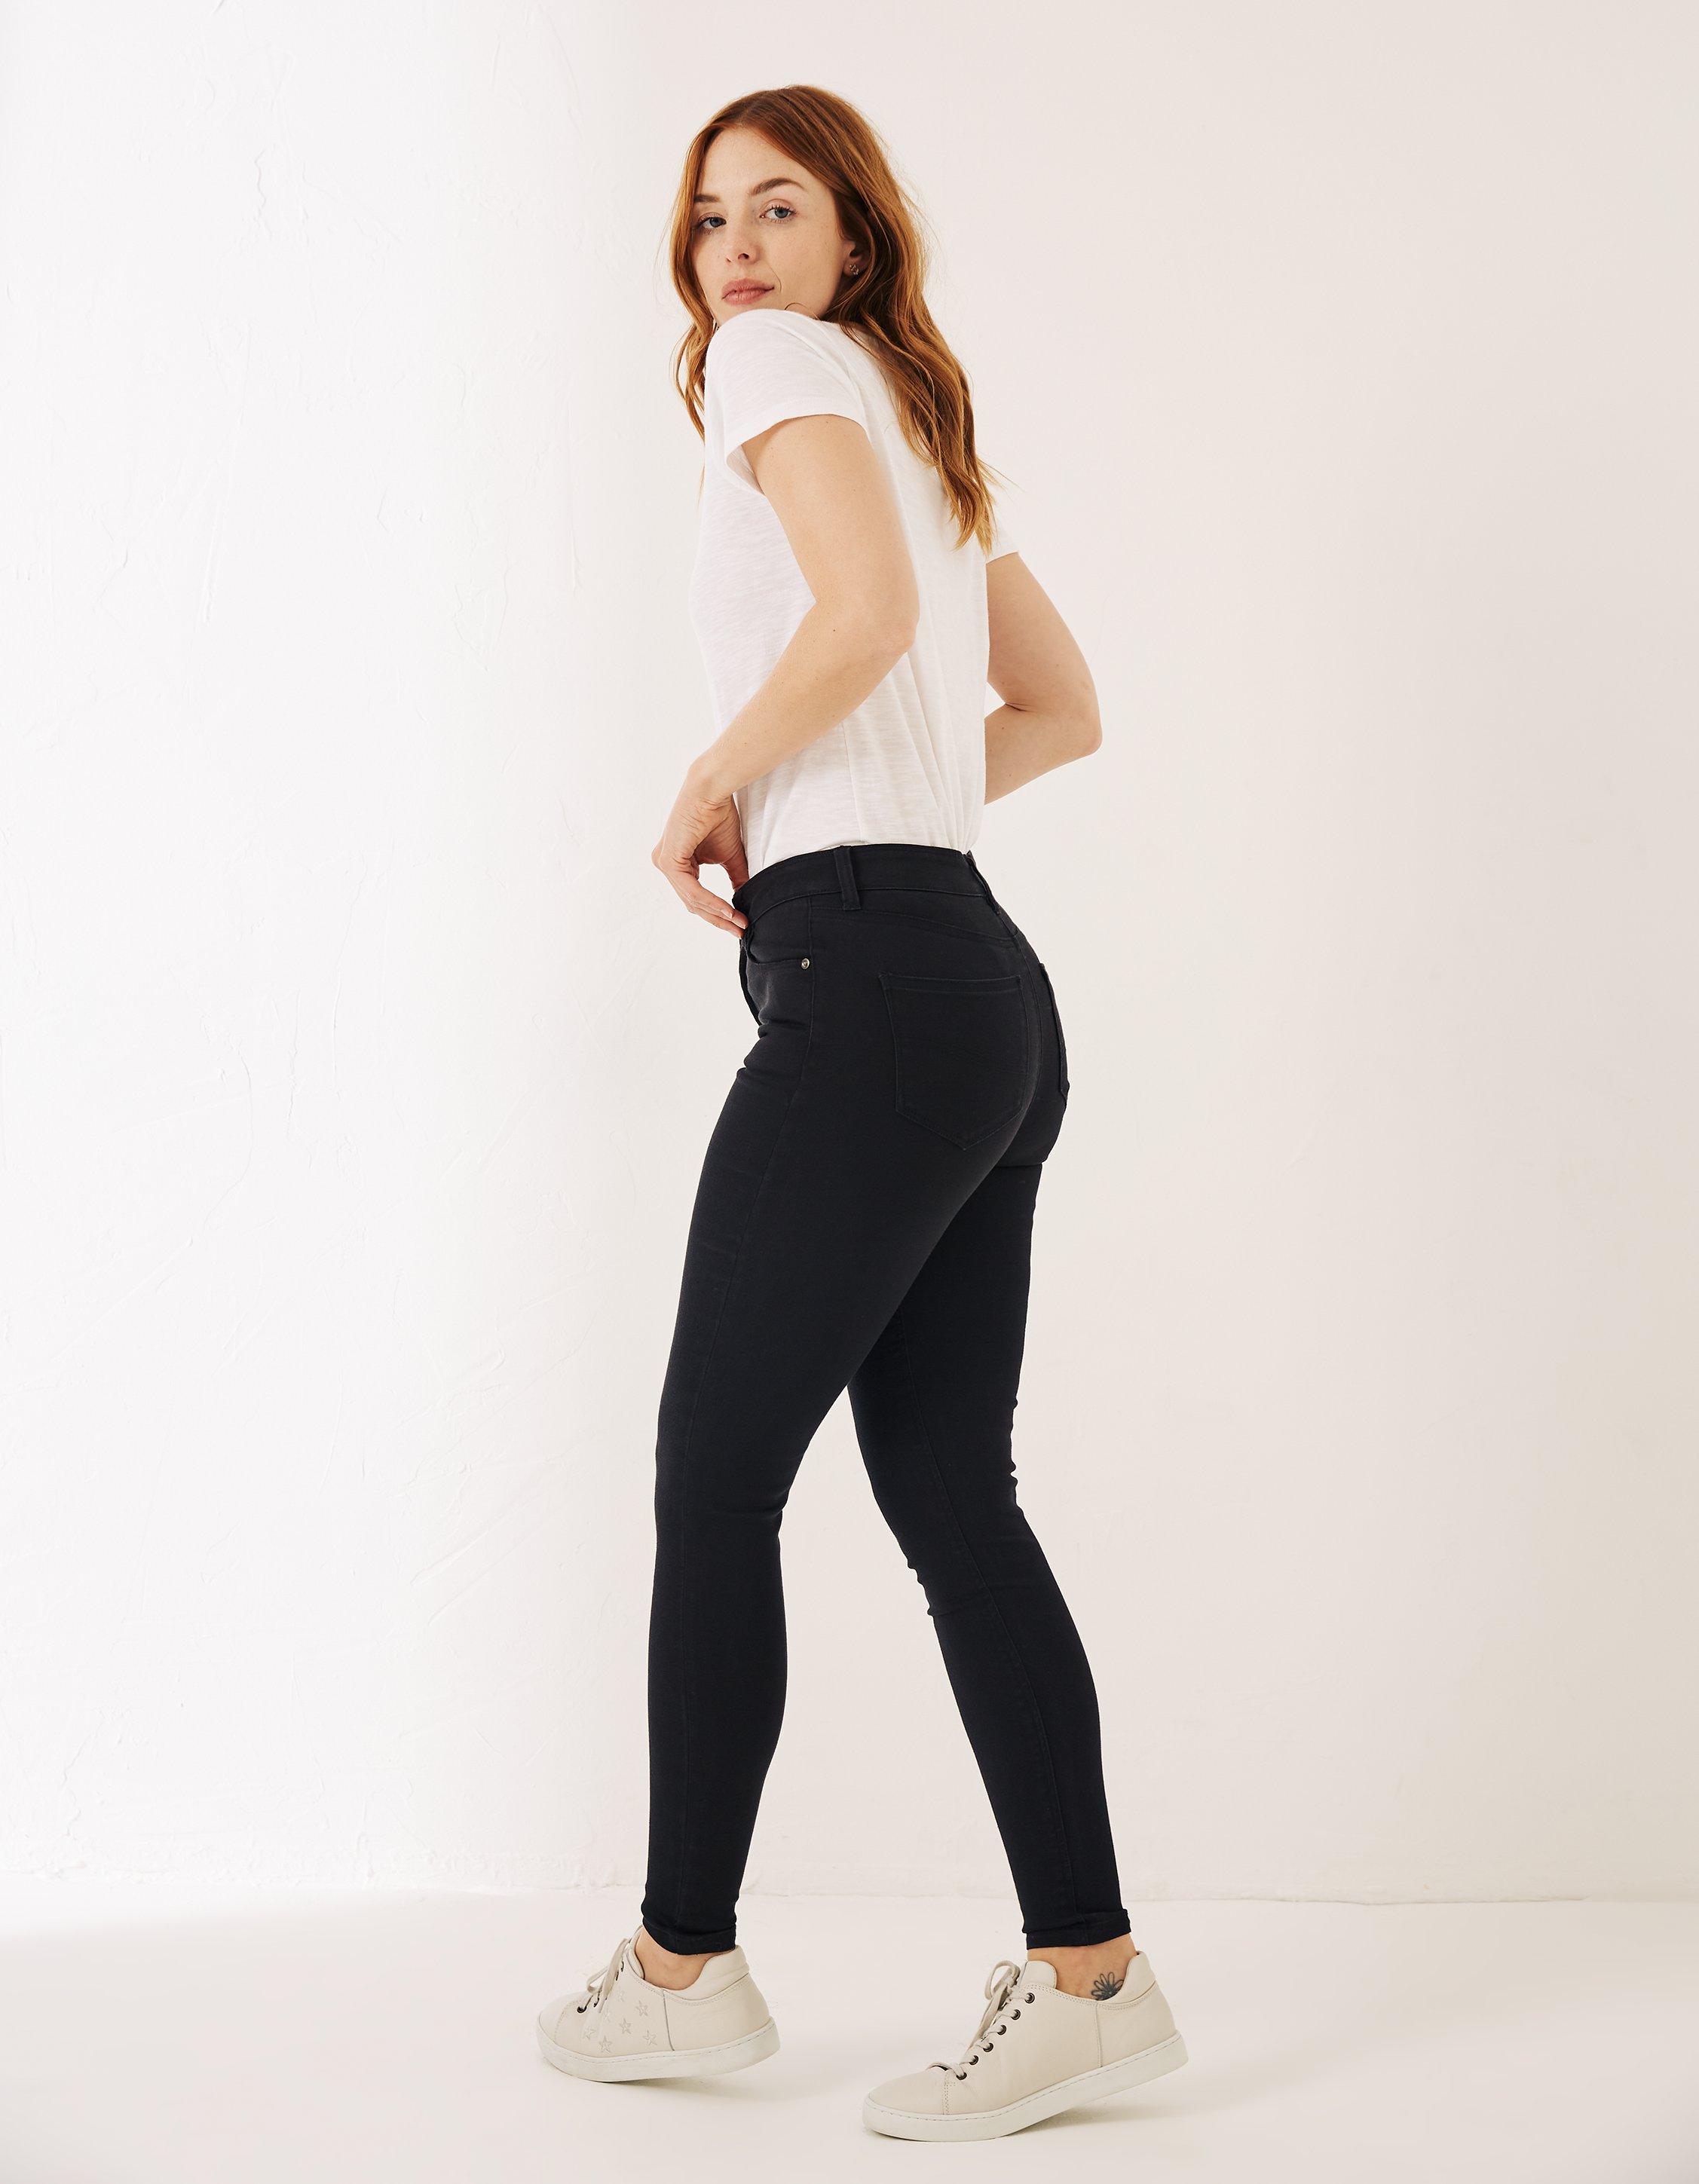 High Waist Ladies Black Cotton Jeggings, Casual Wear, Skinny Fit at Rs 100  in Surat